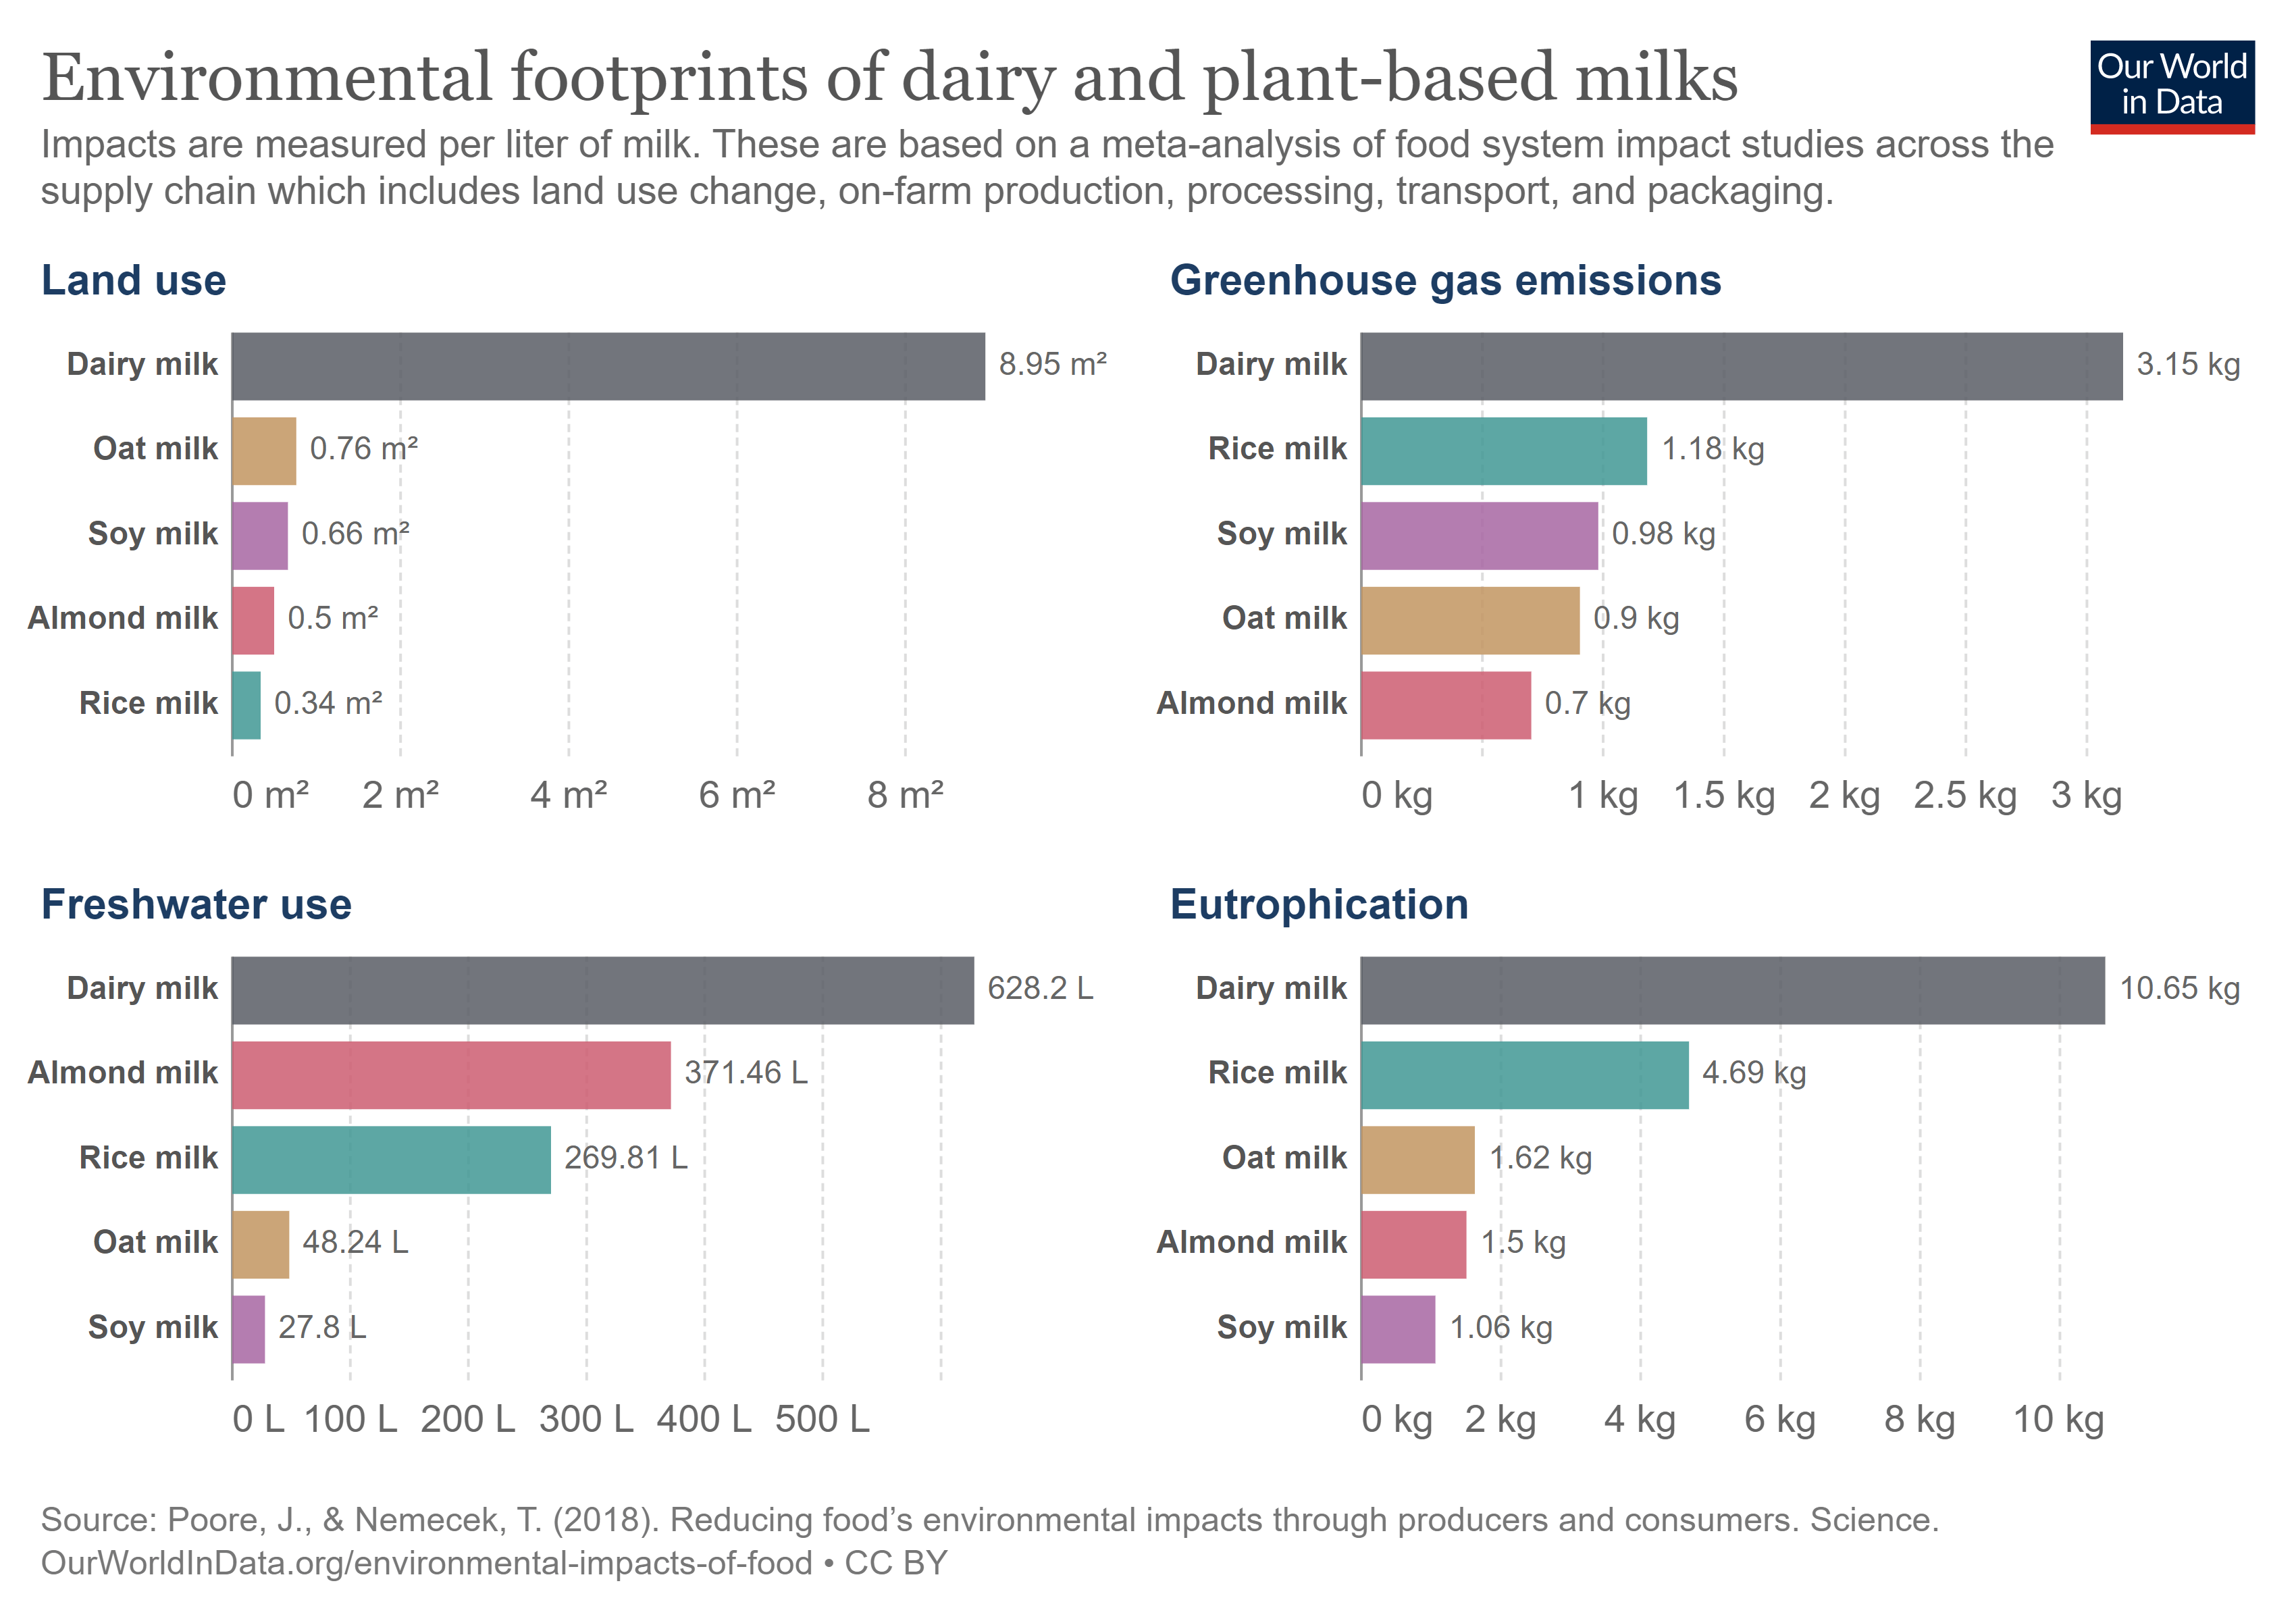 Source: Poore, J., &amp; Nemecek, T. (2018). Reducing food’s environmental impacts through producers and consumers. Science. OurWorldInData.org/environmental-impacts-of-food • CC BY